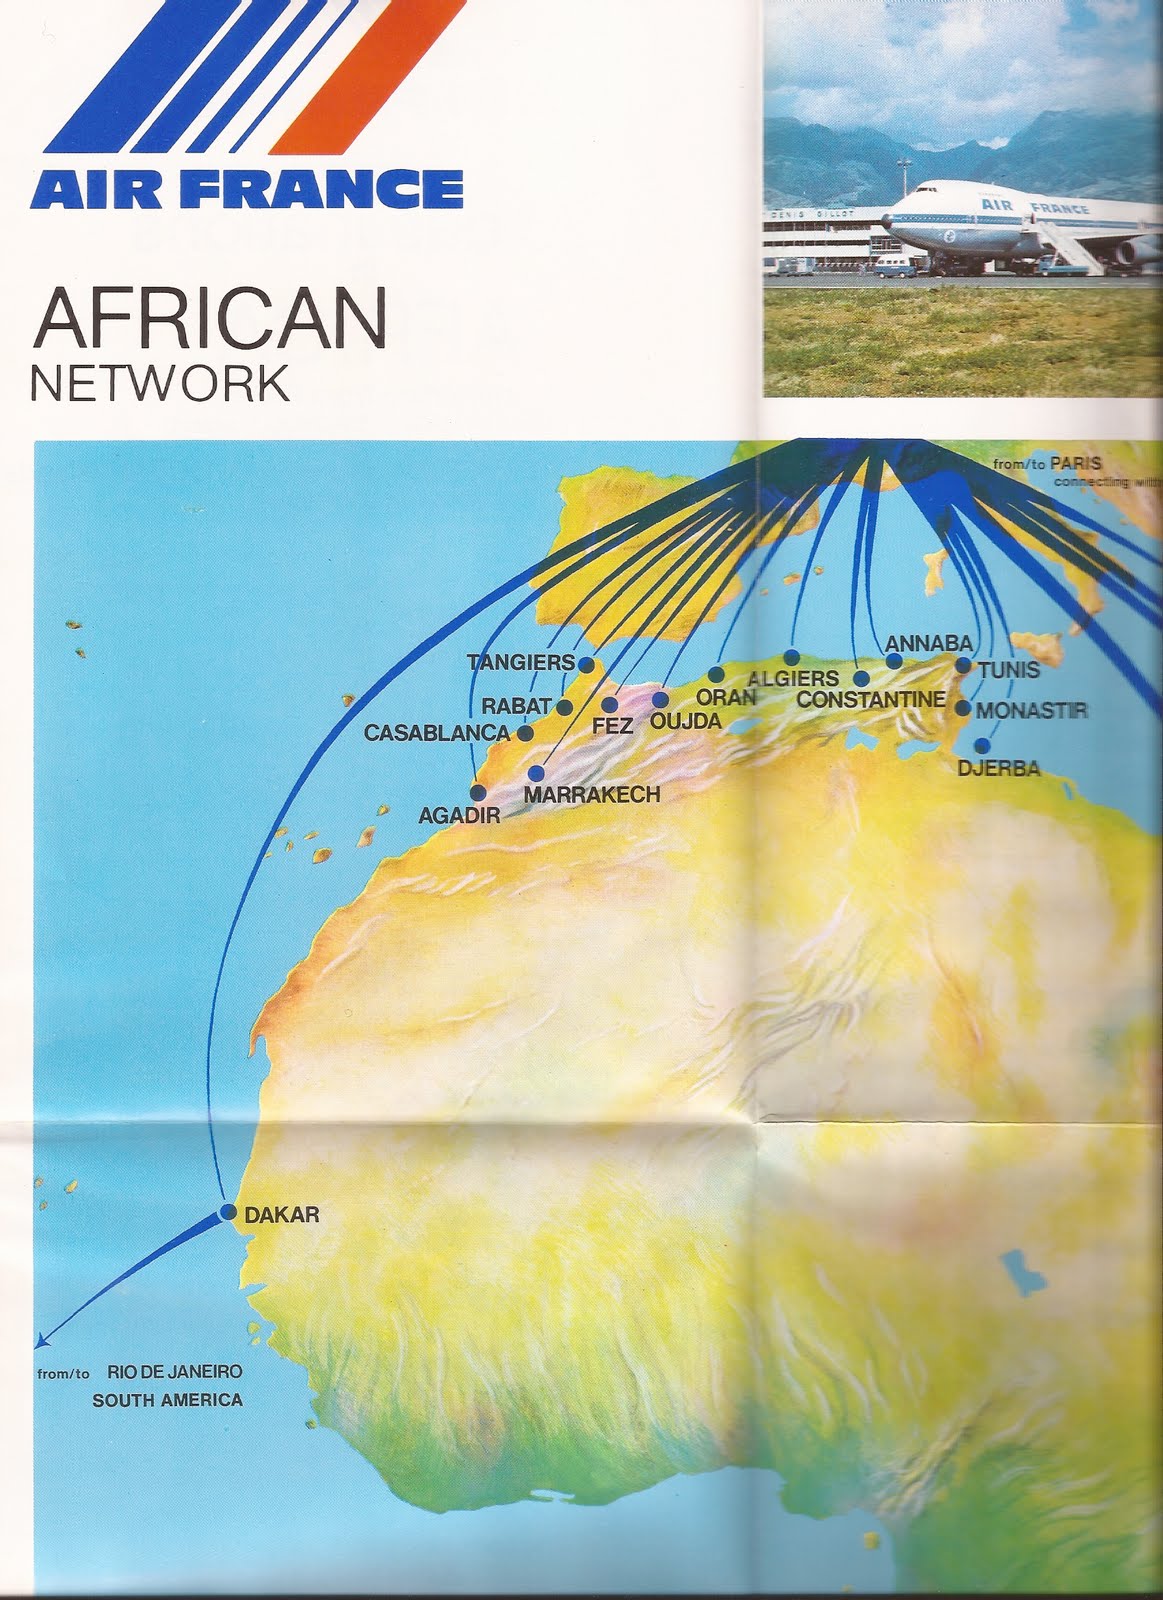 air france route map africa Air France The African Routes 1977 Trip Guide News air france route map africa